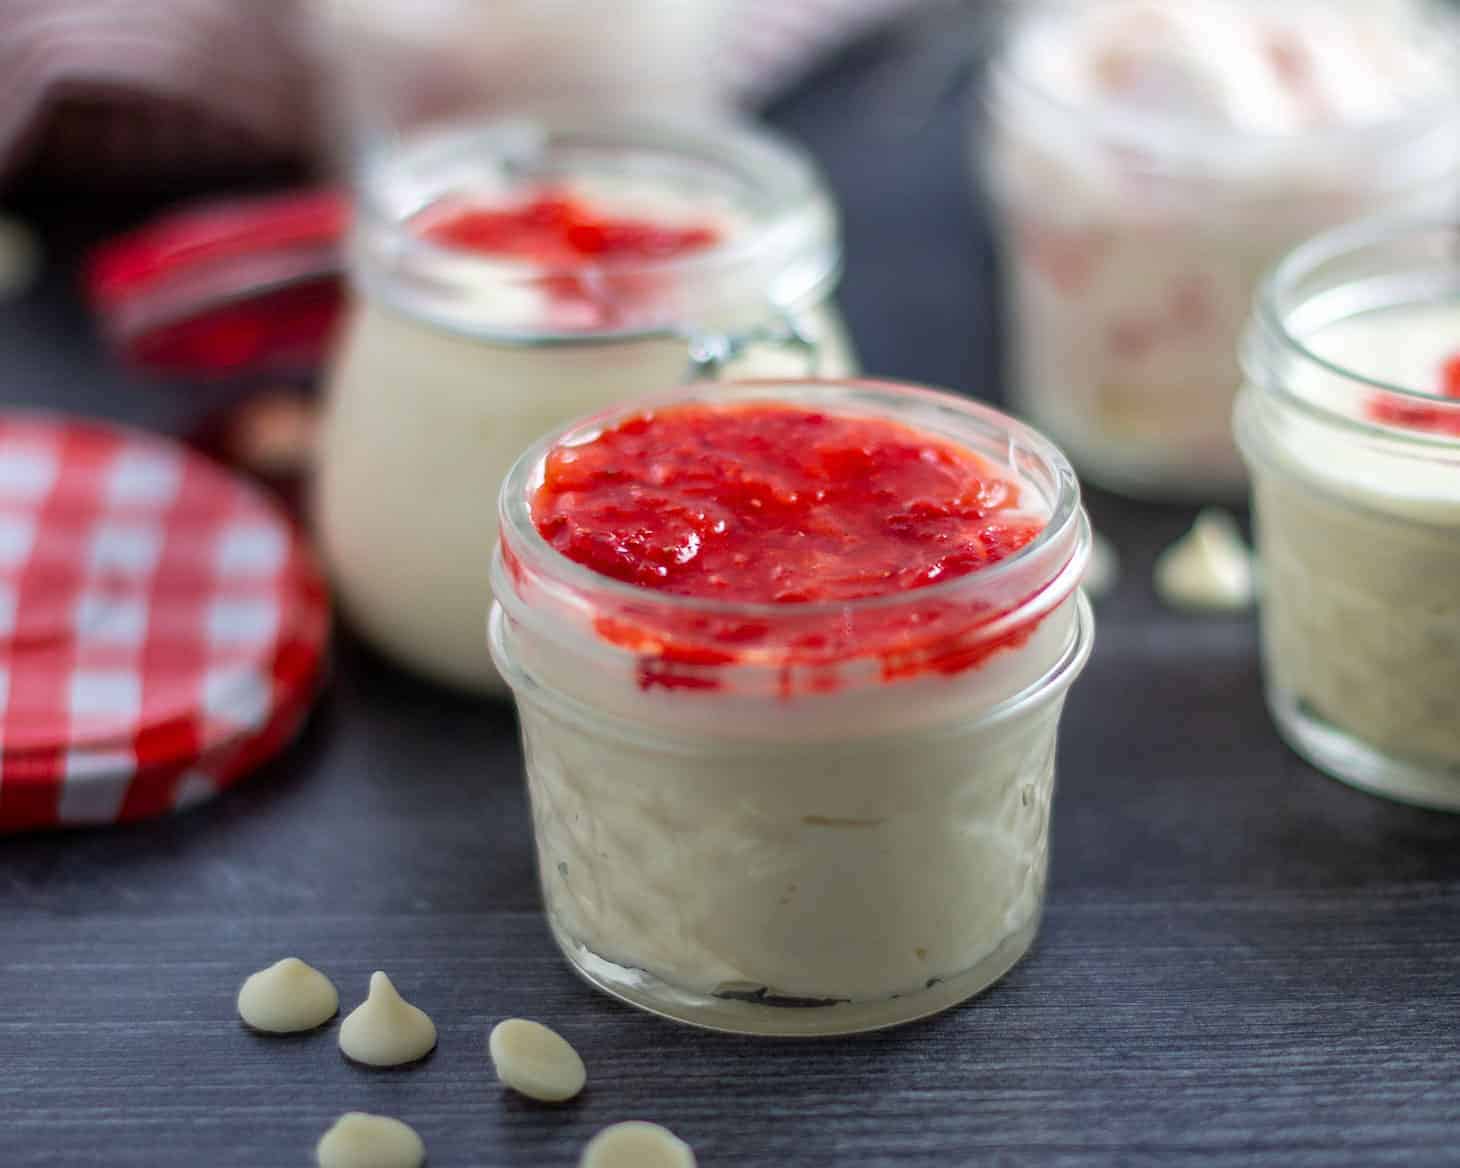 small mason jars with white chocolate mouse